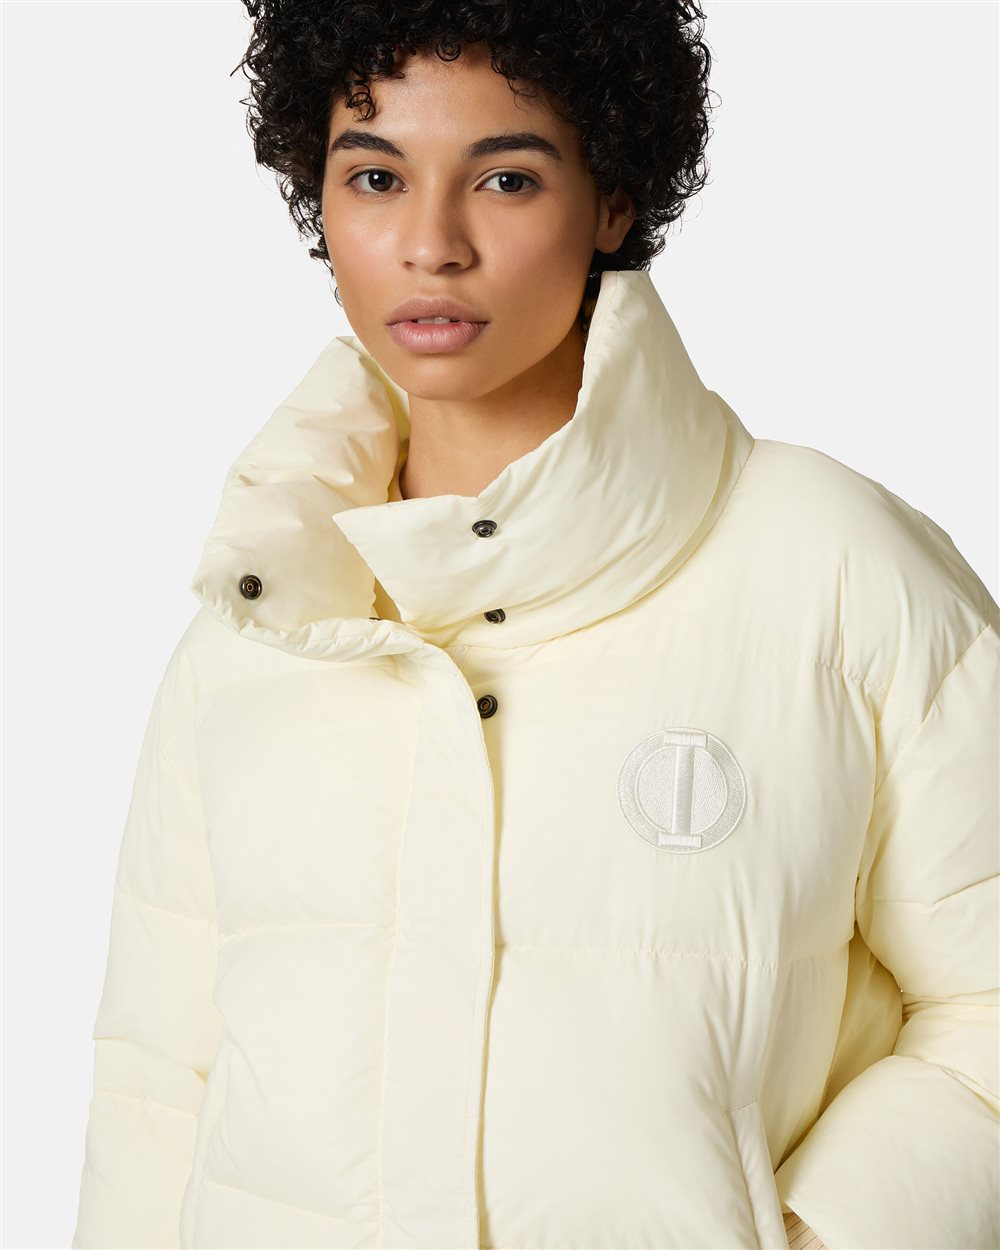 Quilted jacket with logo - Iceberg - Official Website